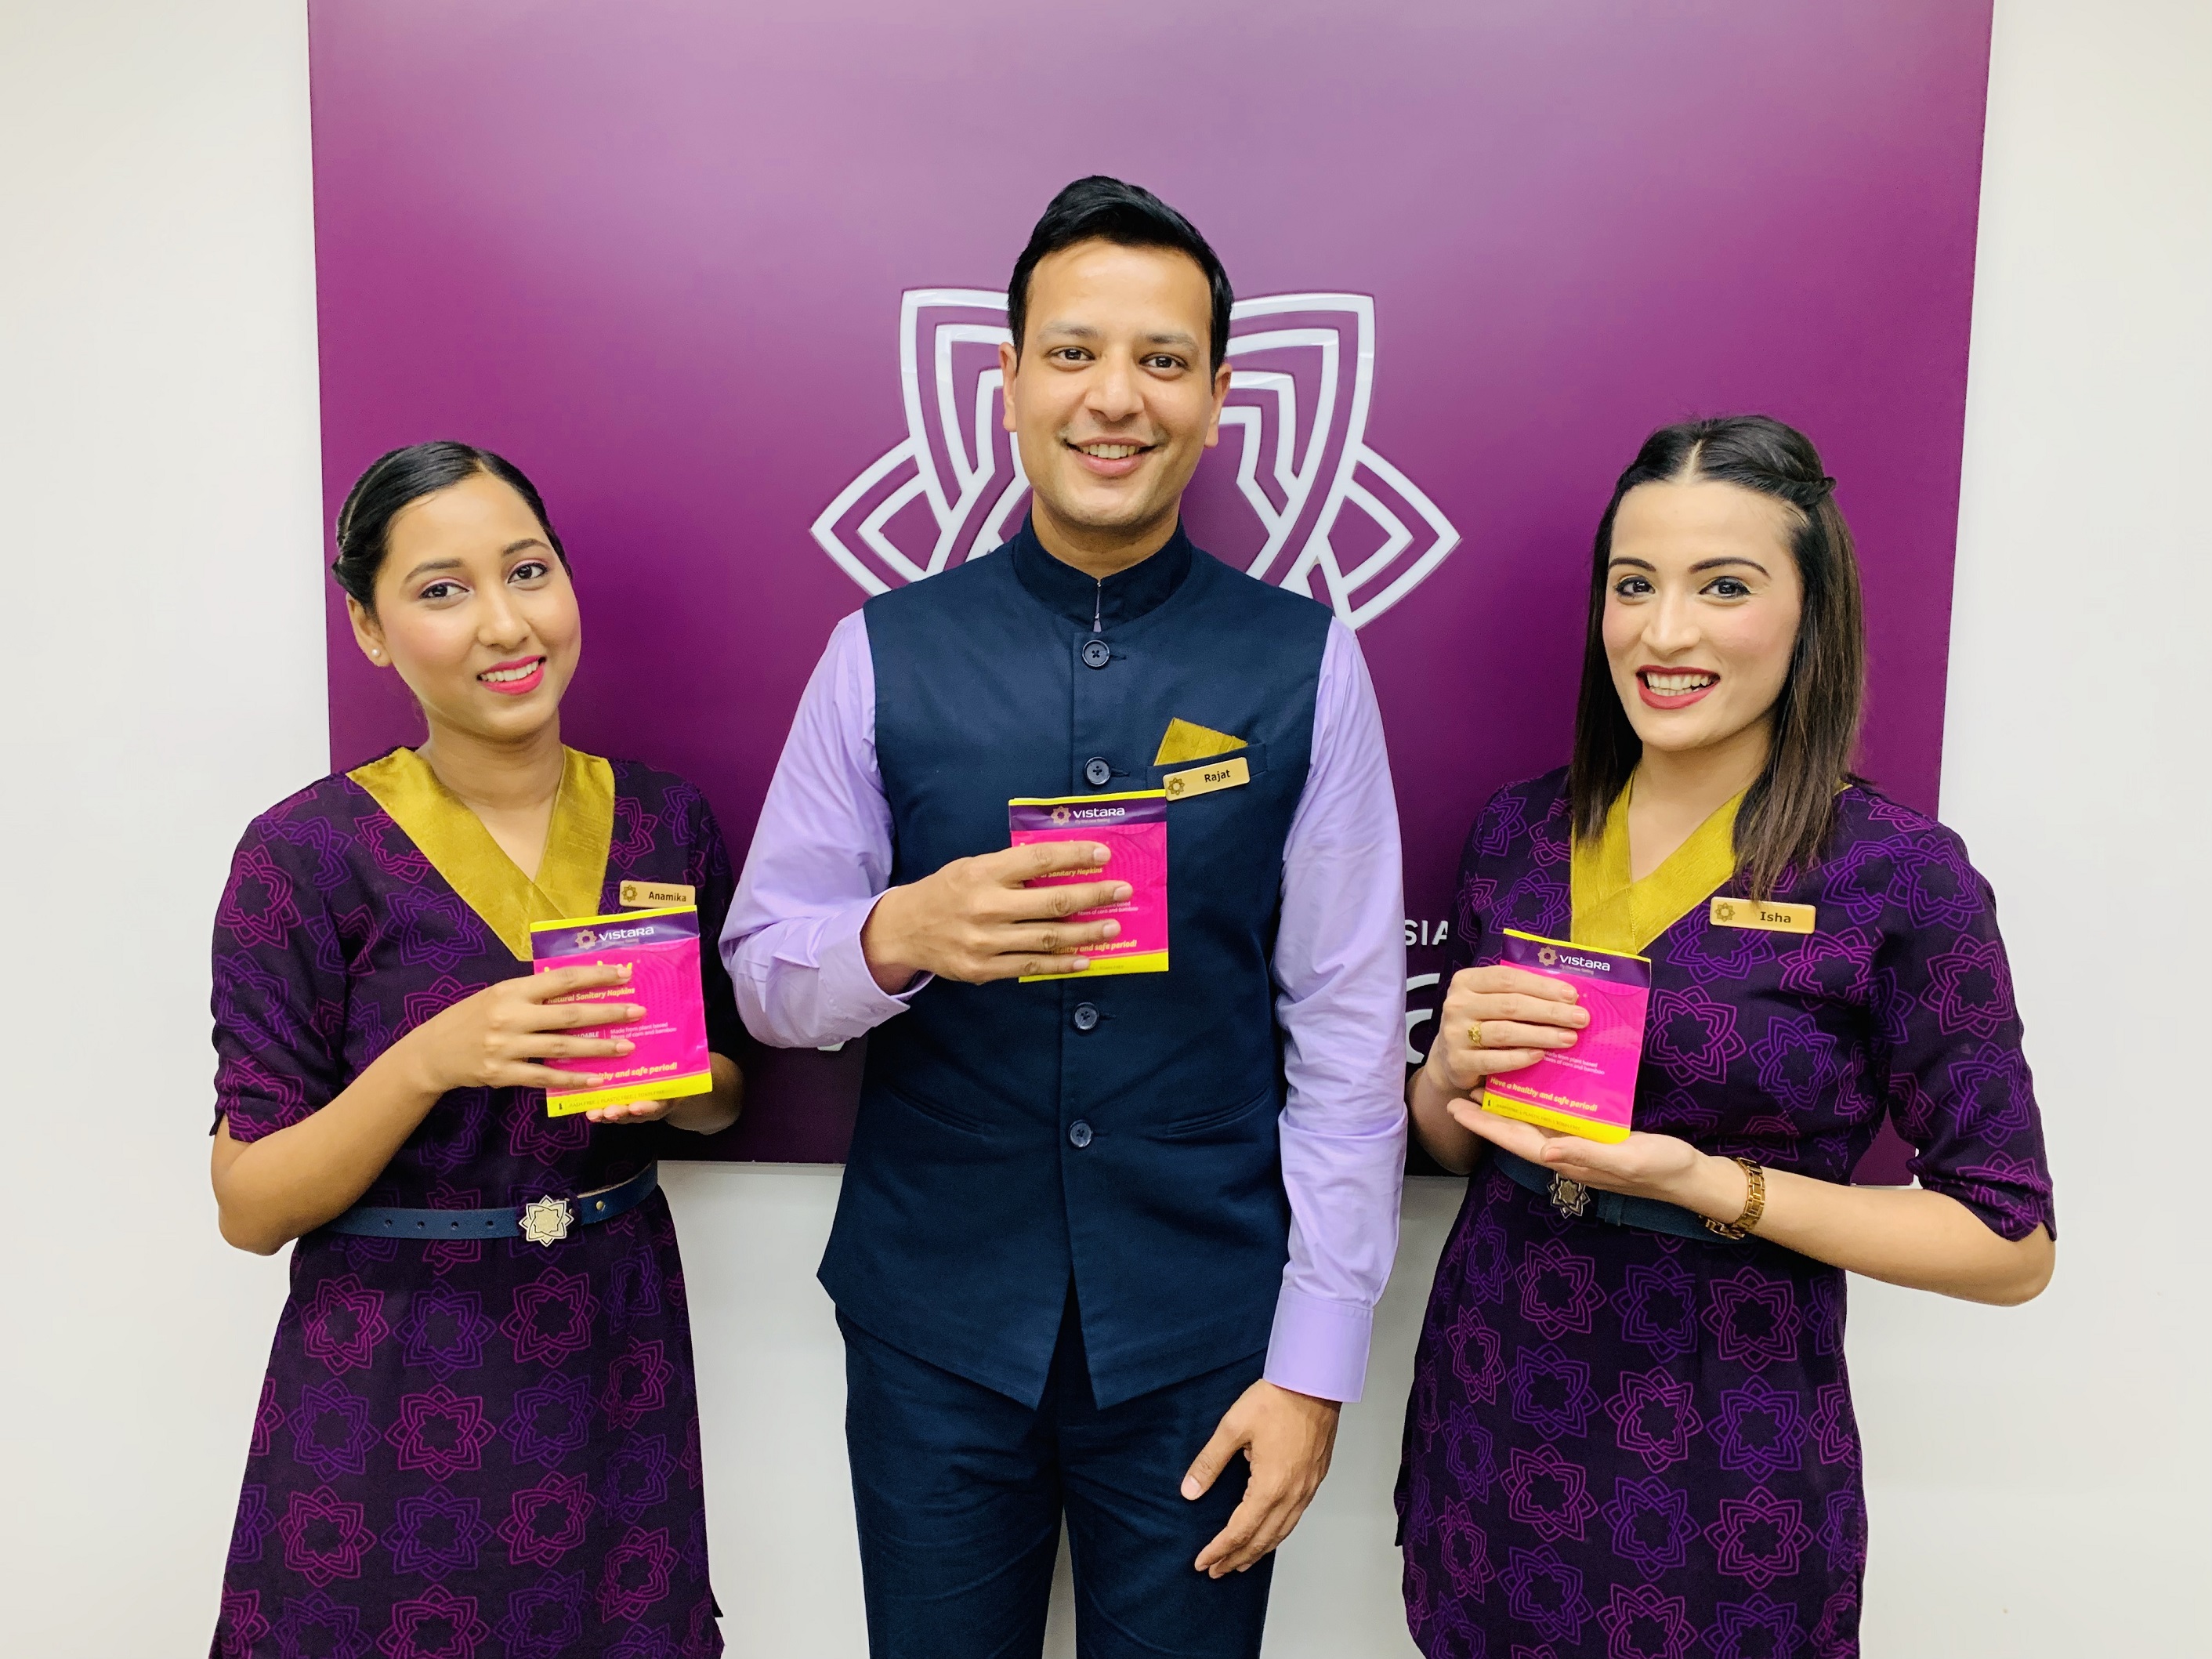 Vistara becomes first Indian airline to provide sanitary pads onboard domestic flights starting this International Women’s Day